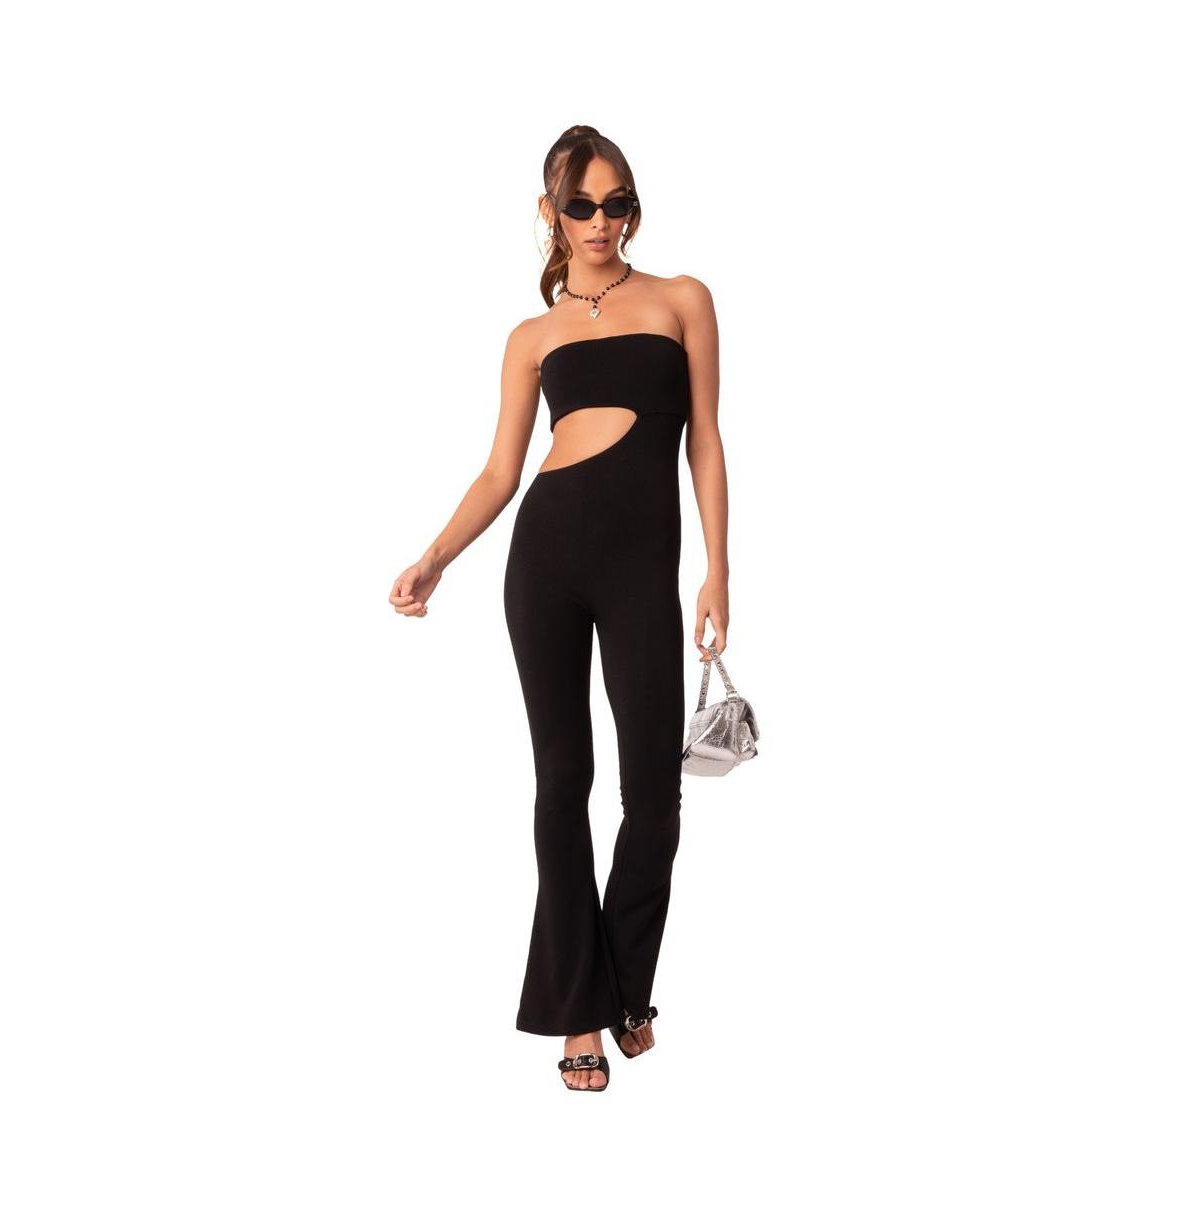 EDIKTED WOMEN'S STRAPLESS FLARE JUMPSUIT WITH WAIST CUT OUT